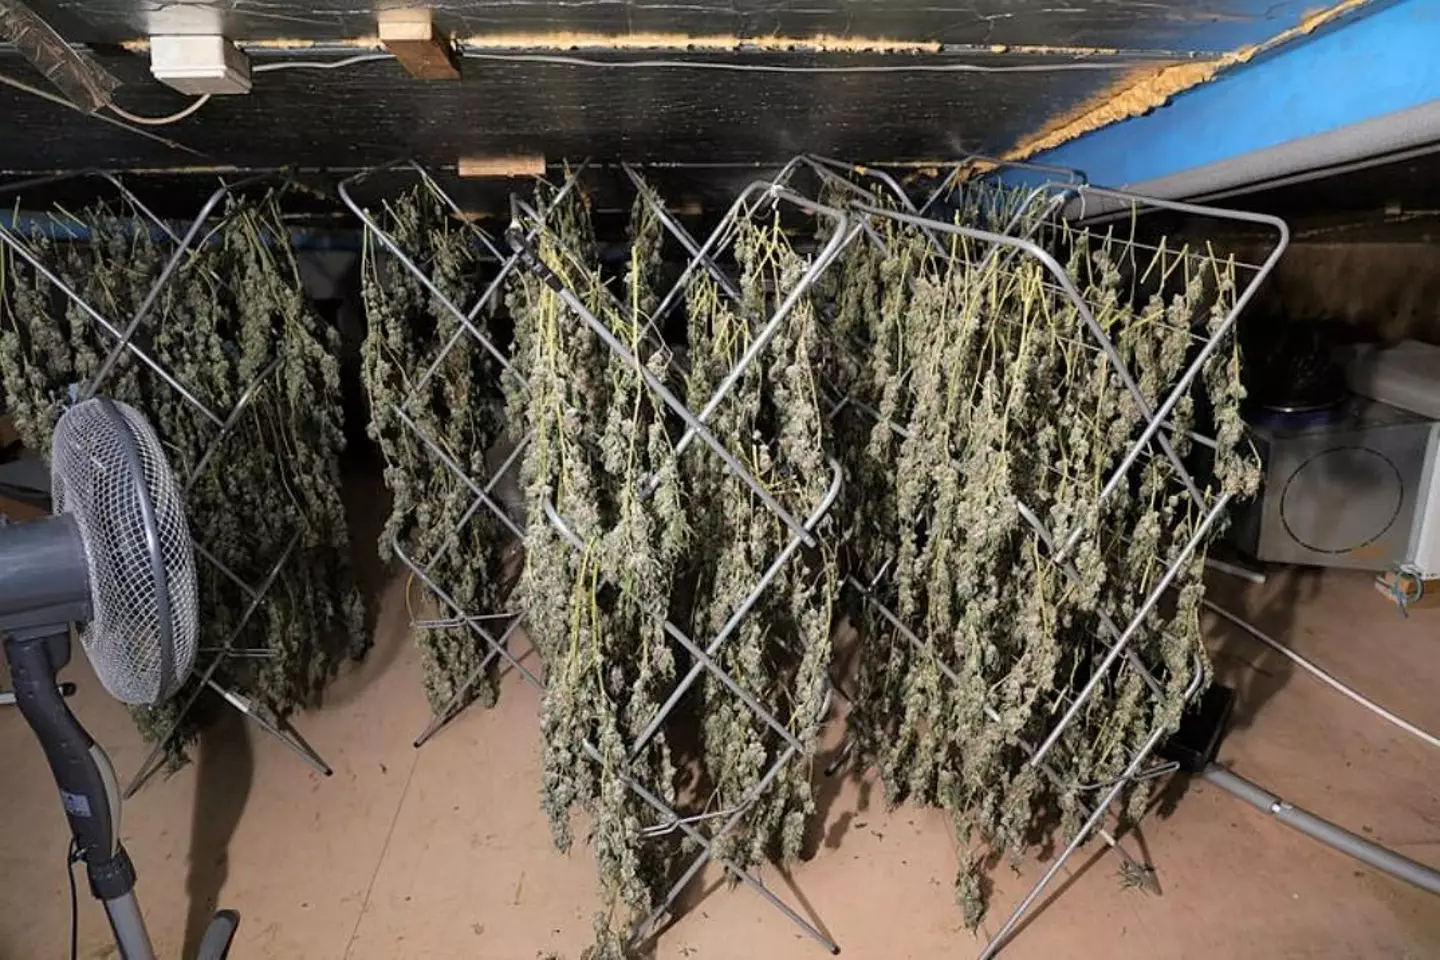 Police recovered more than 200 cannabis plants that were being grown.